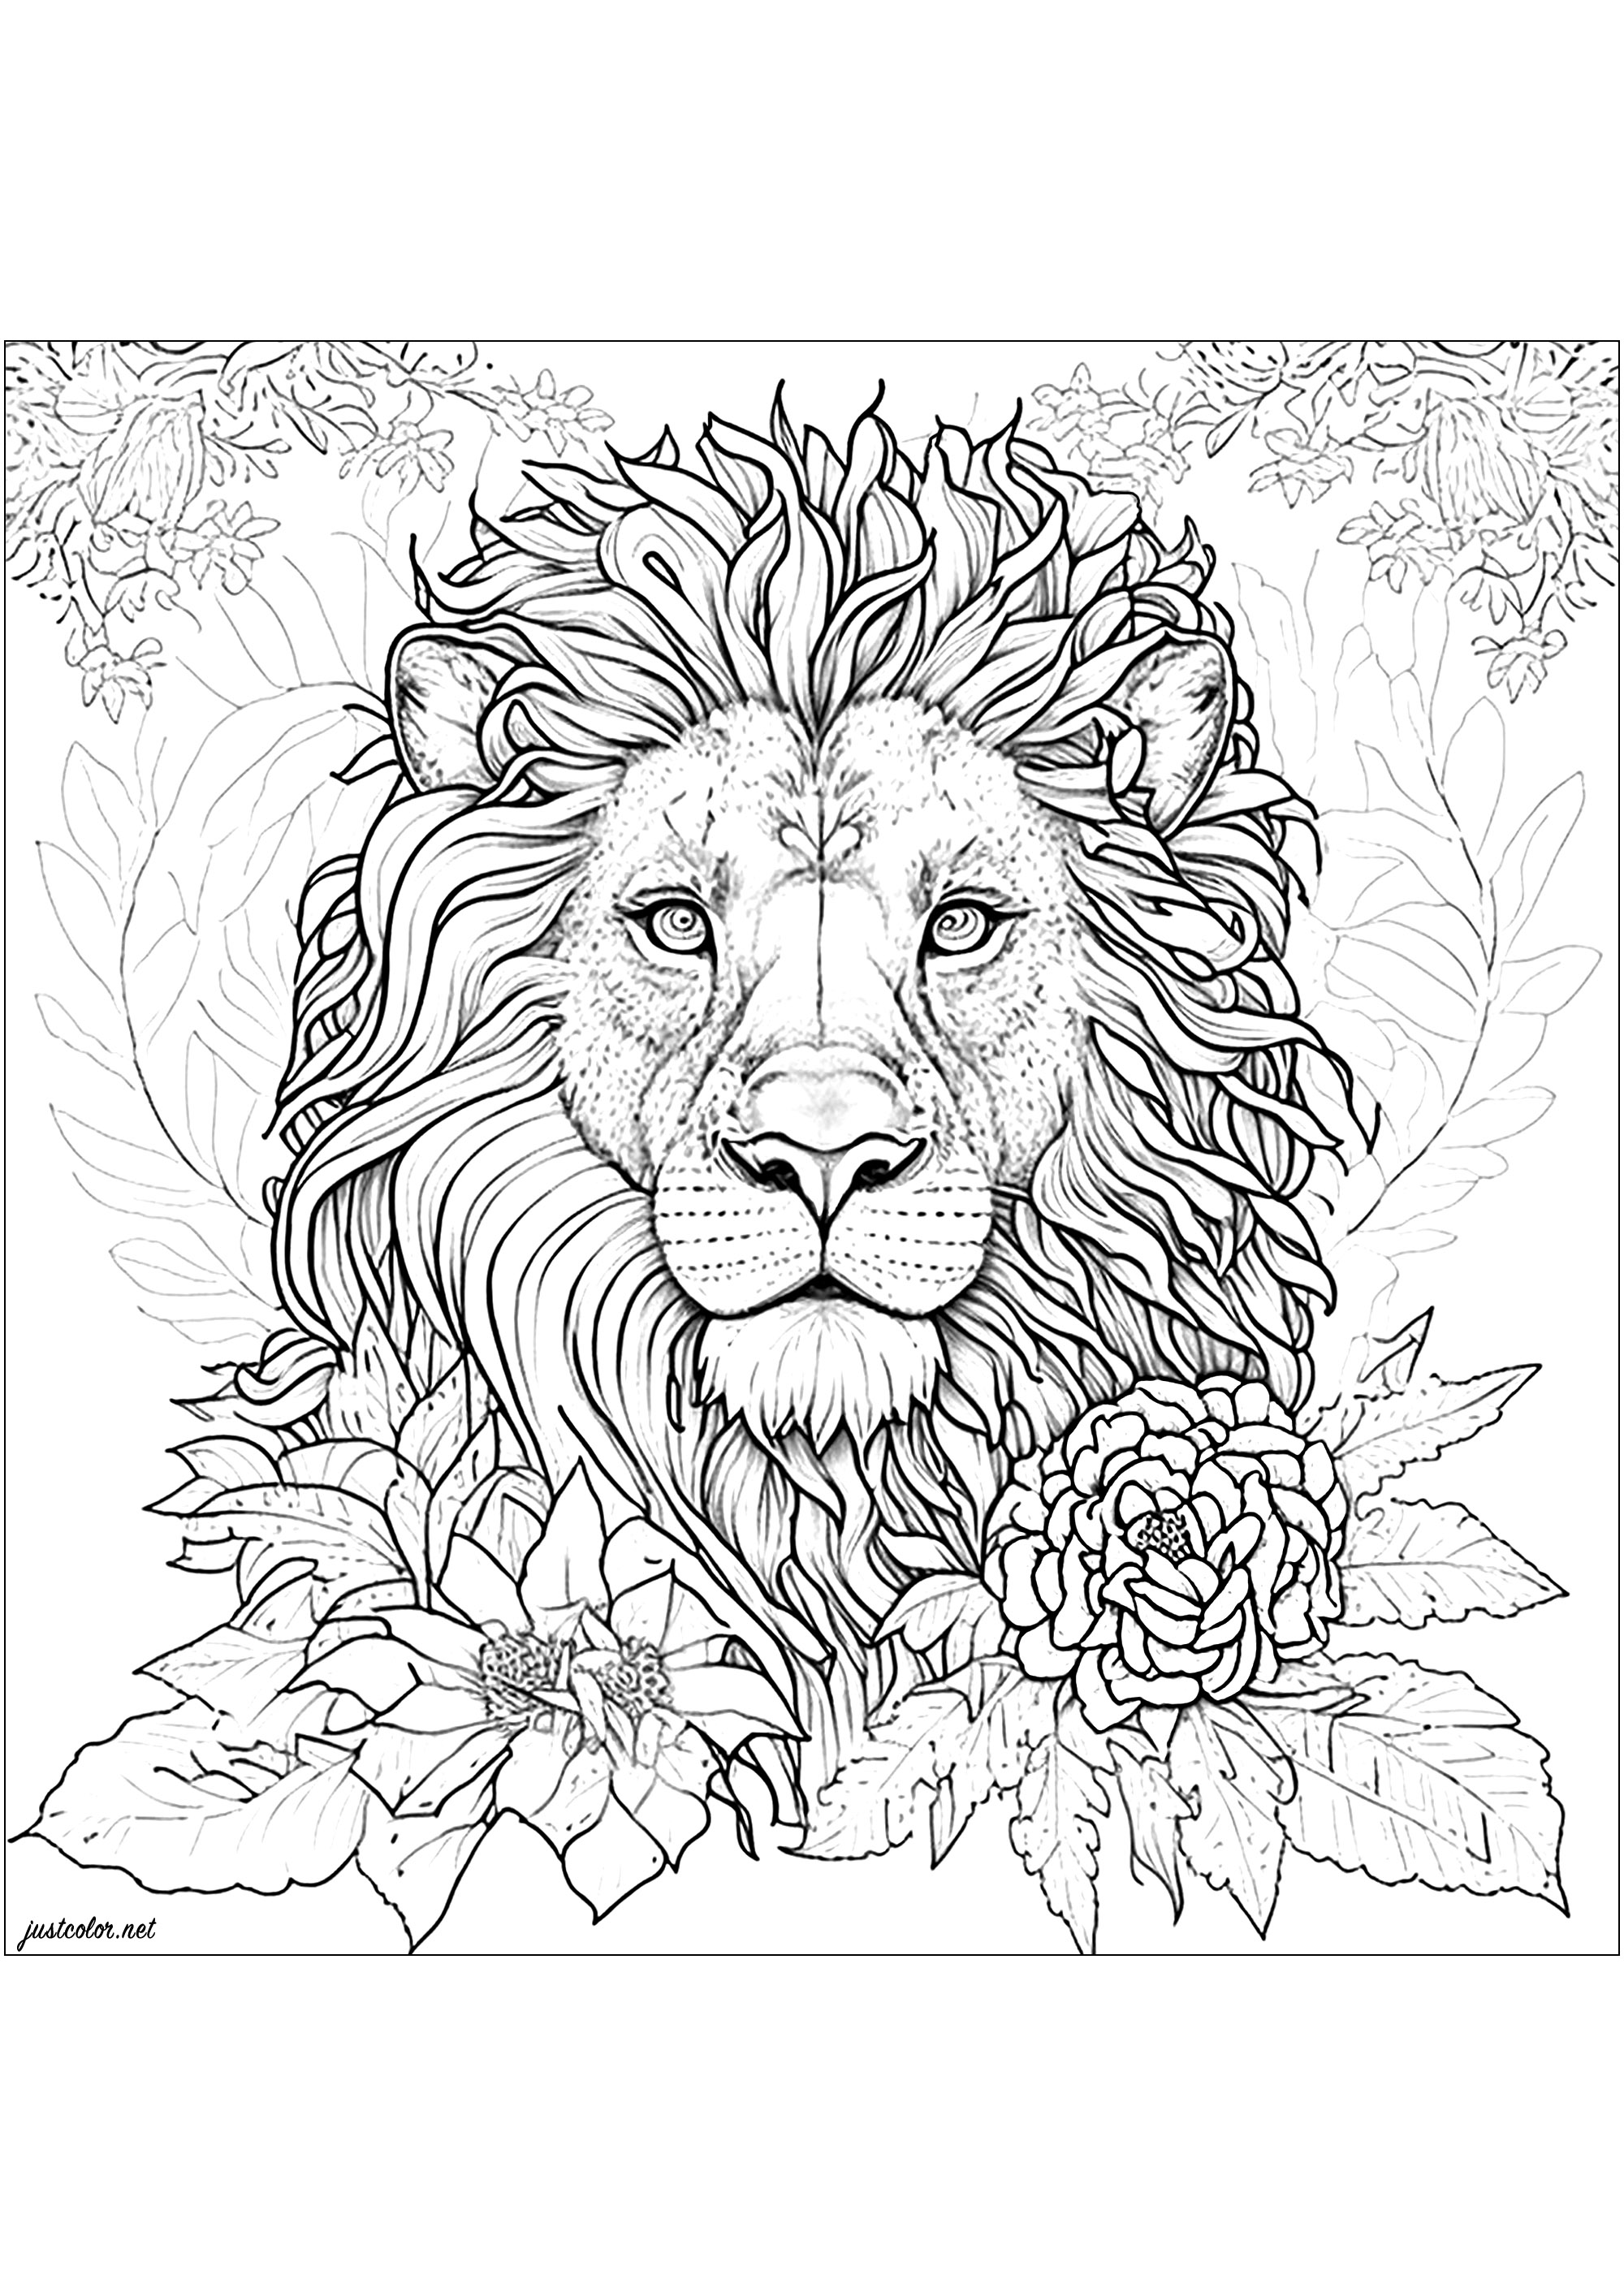 Coloring of a lion surrounded by beautiful flowers. This lion drawing is ultra realistic and detailed! Take your time to color every part of his beautiful mane, and all the vegetation that surrounds him.